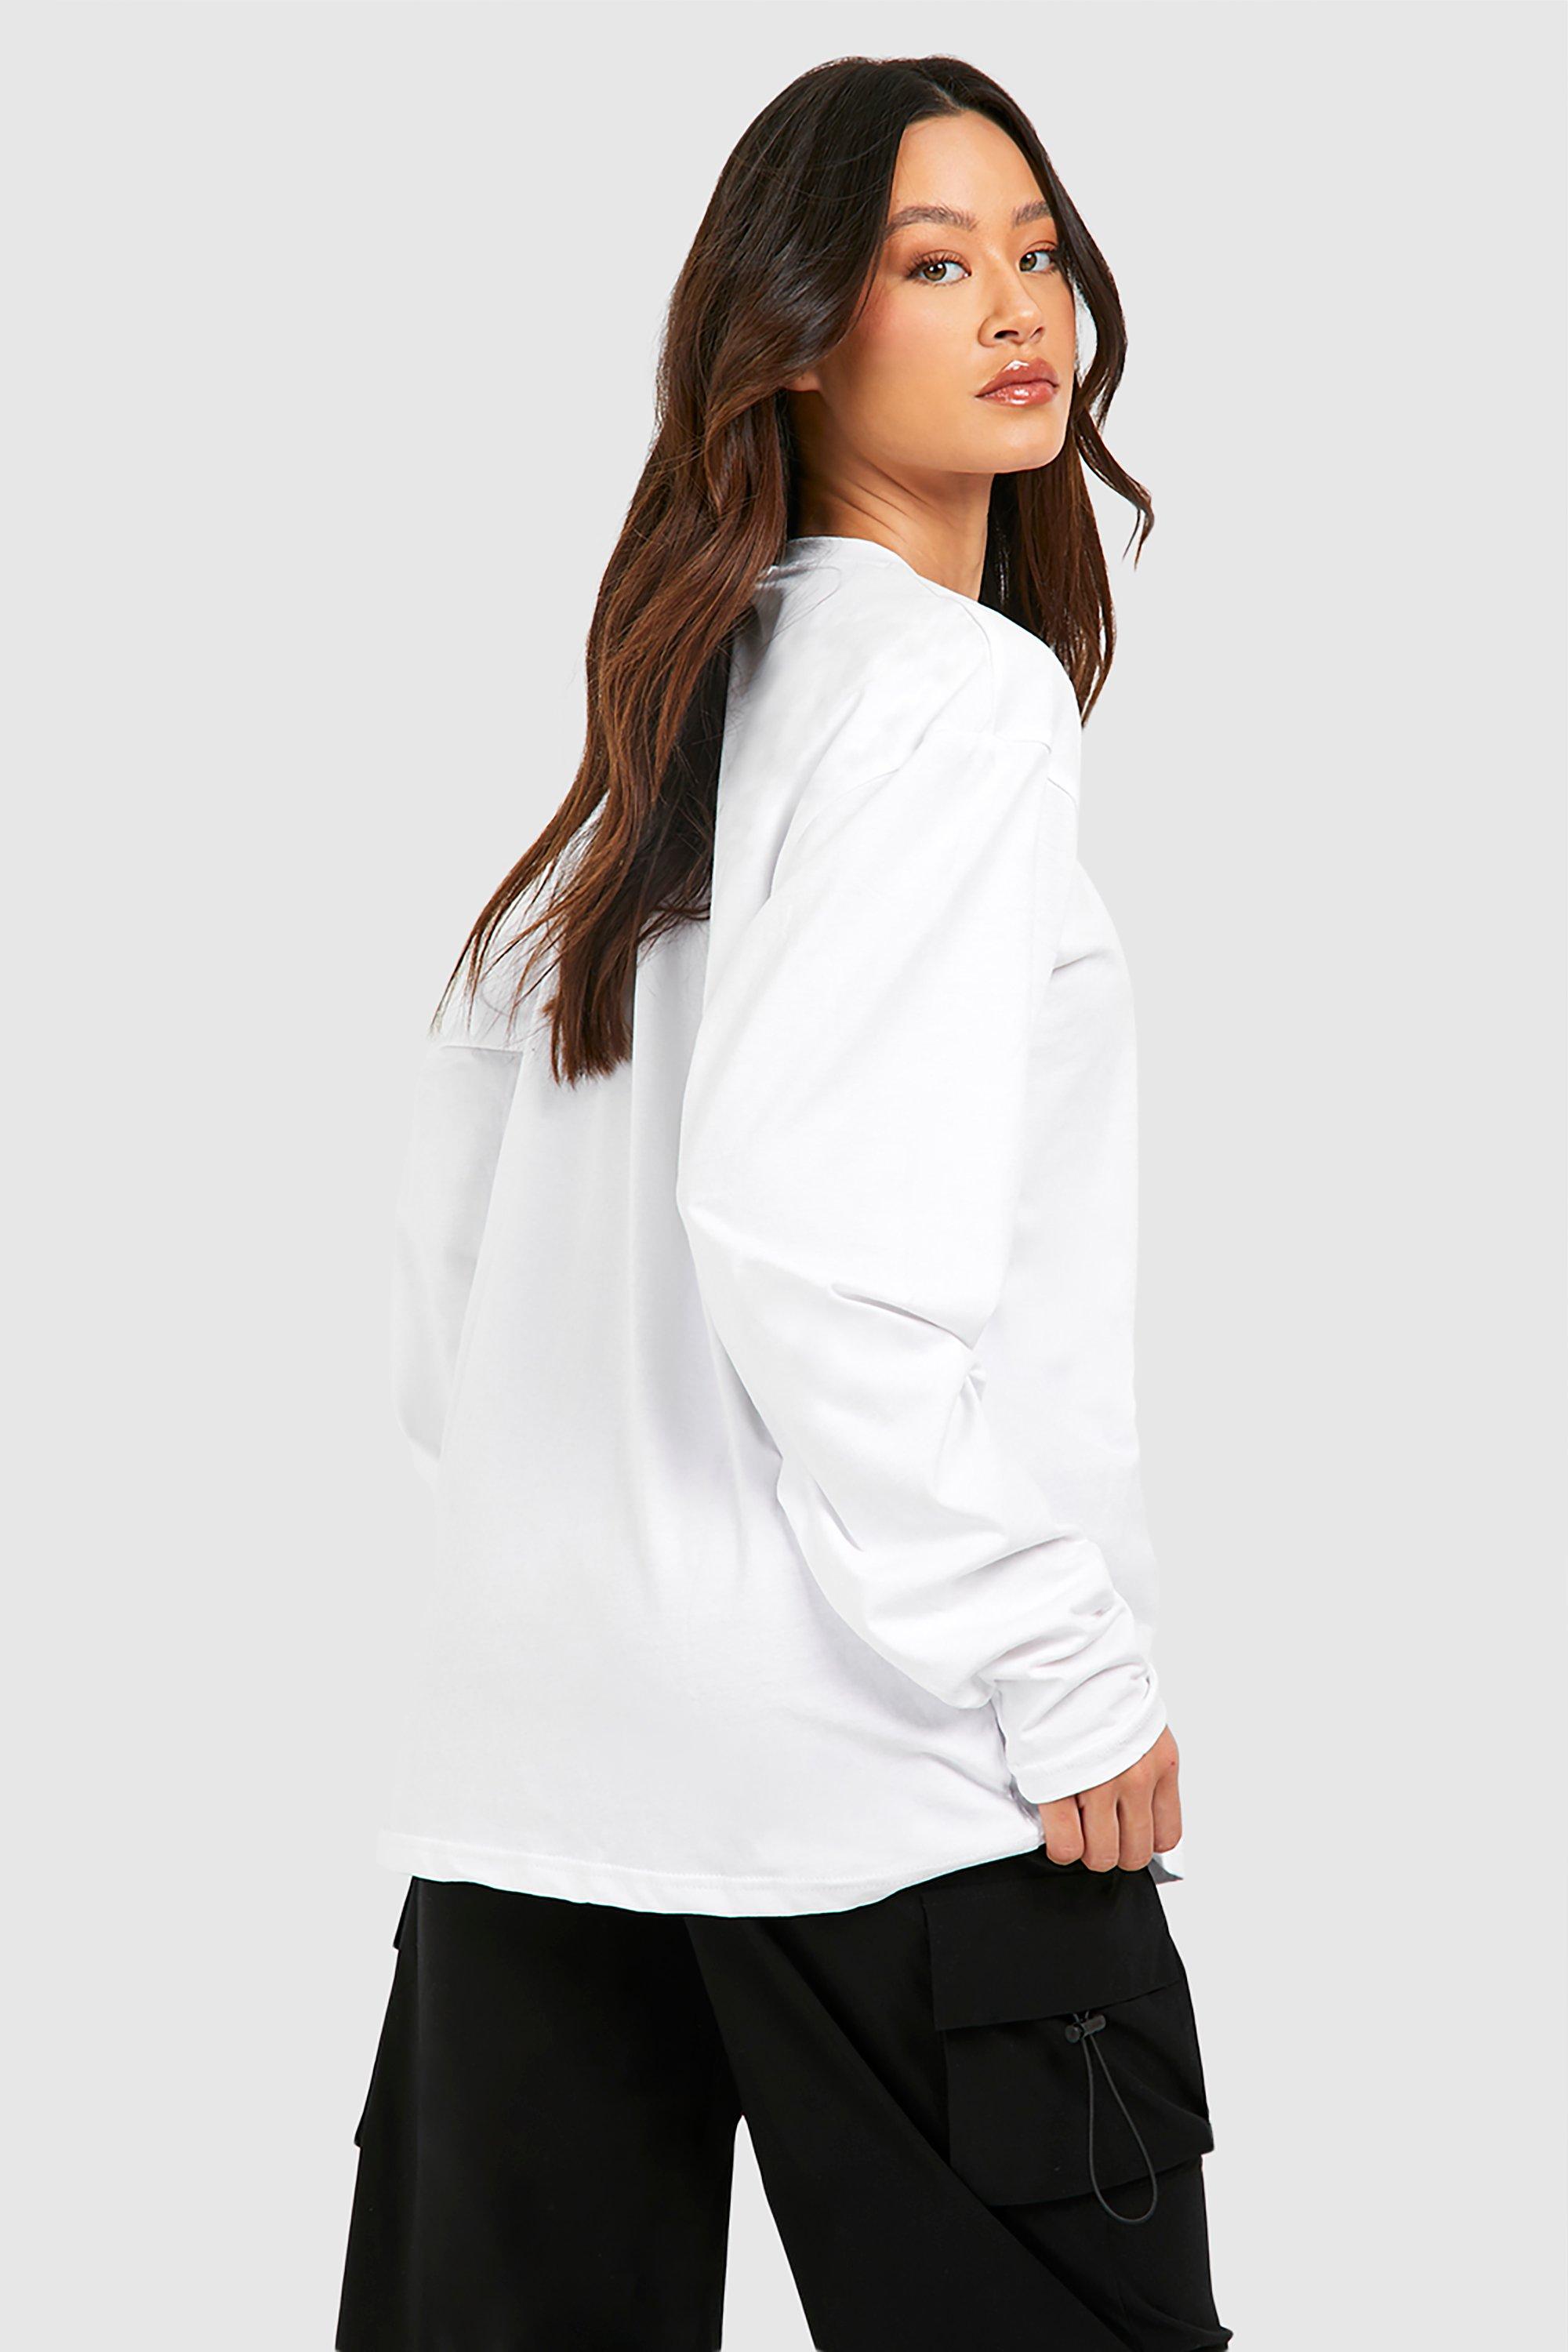 Cotton Oversized Long Sleeve Top